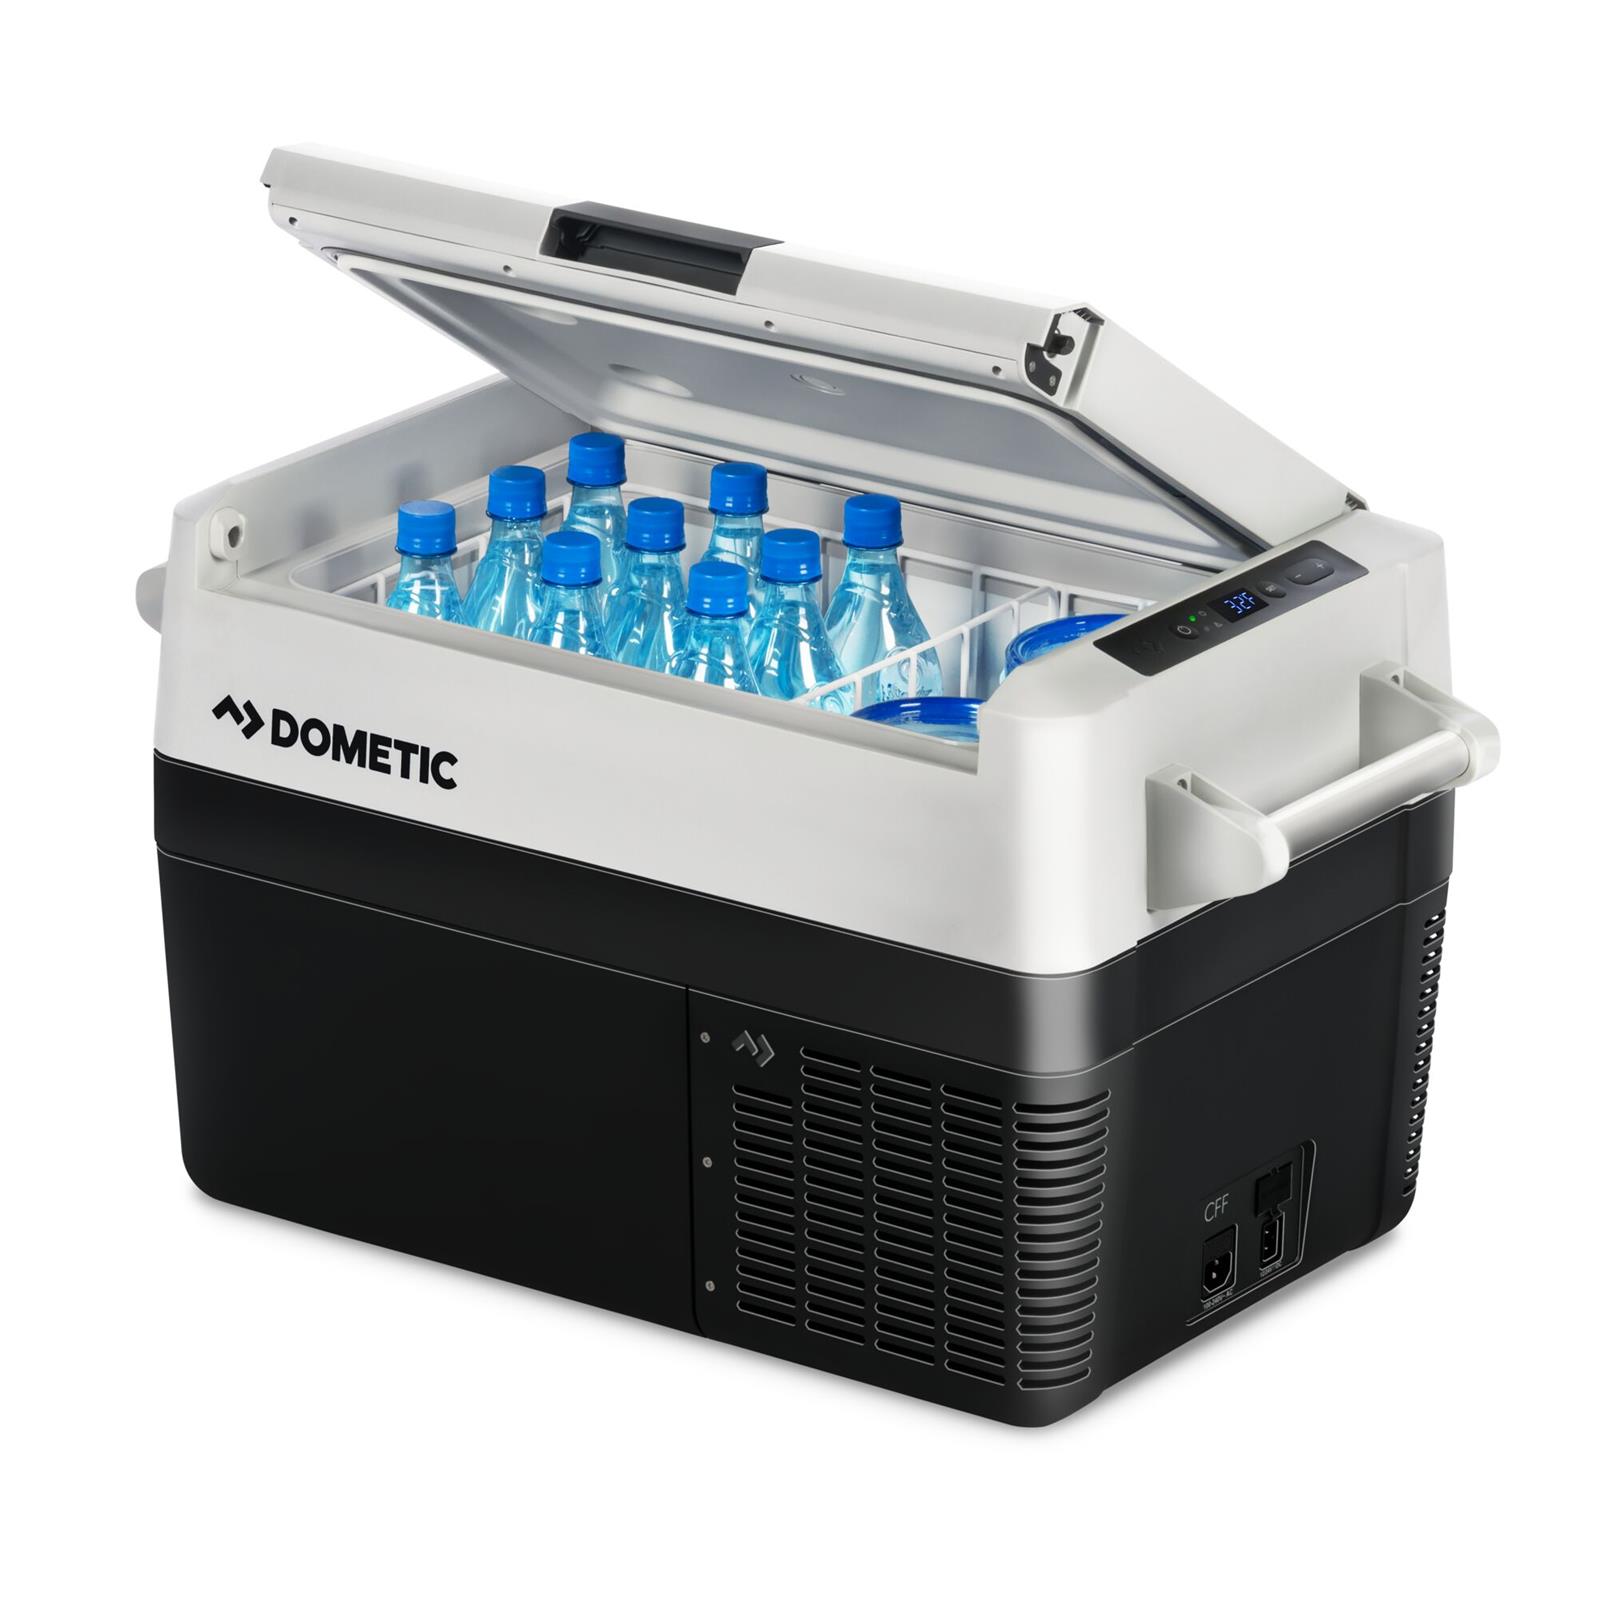 Dometic Cff 35 Powered Cooler - Ships Free